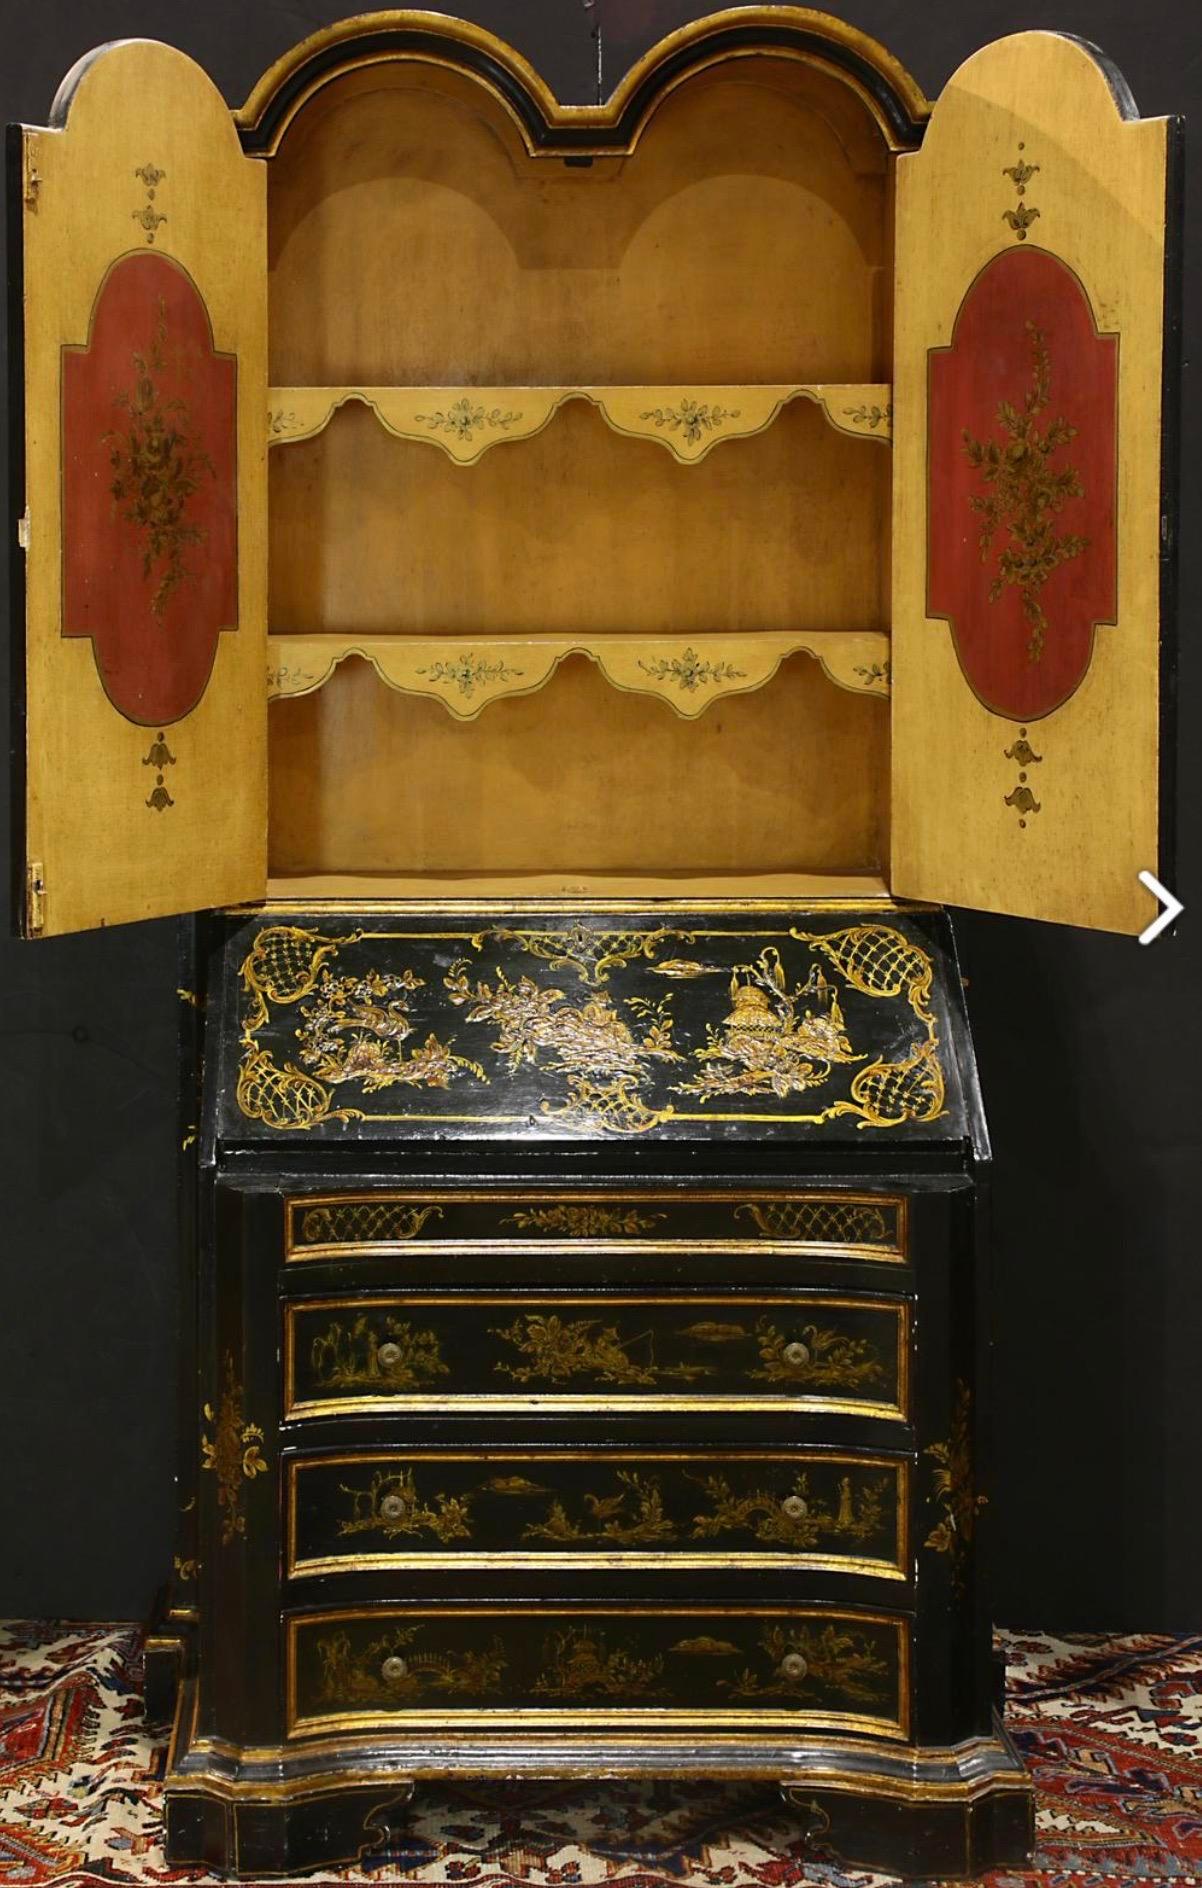 Late 19th-early 20th century George II style chinoiserie drop front secretary, circa 1900

An outstanding example of late 19th century chinoiserie decorated furniture

A rich ebonized background decorated with gilded scenes

The top cabinet